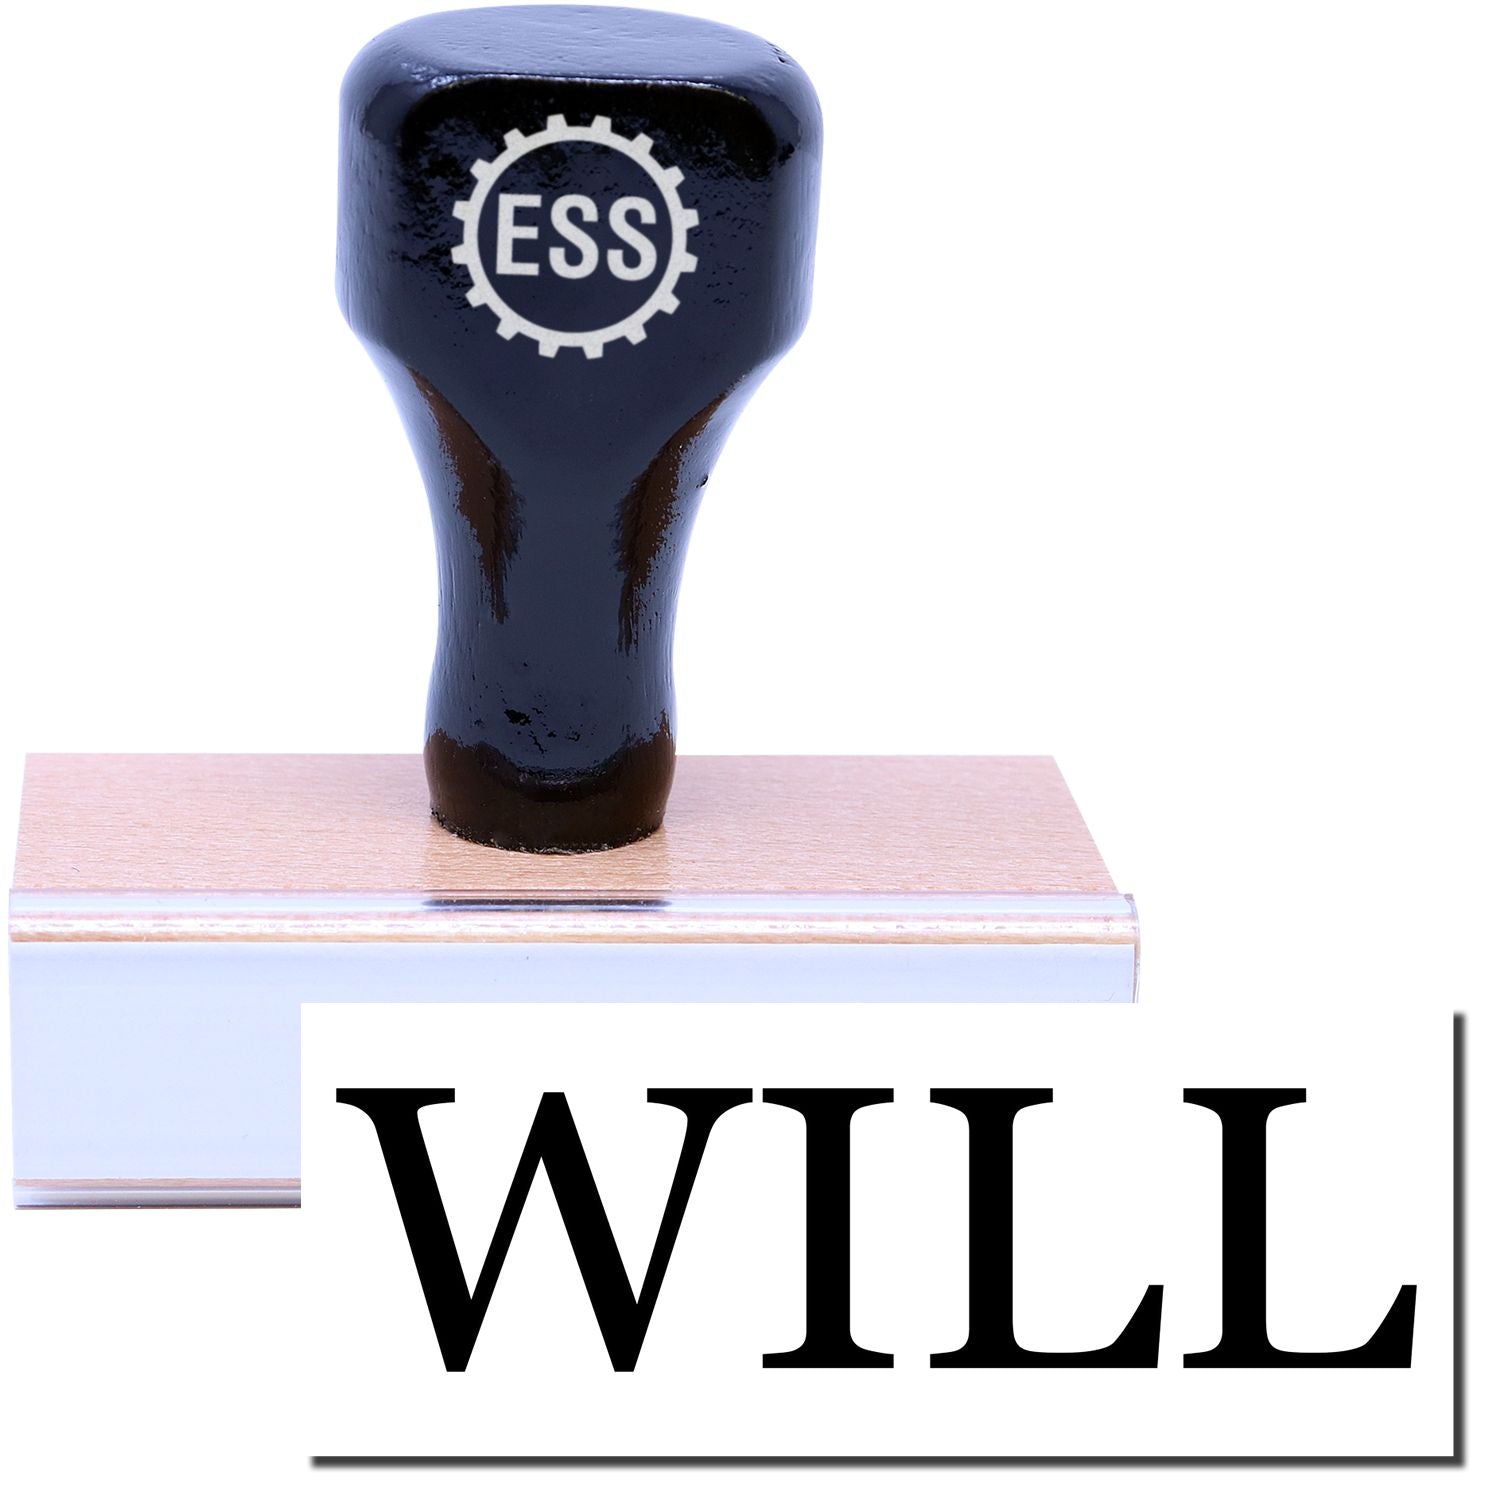 A stock office rubber stamp with a stamped image showing how the text "WILL" in a large font is displayed after stamping.